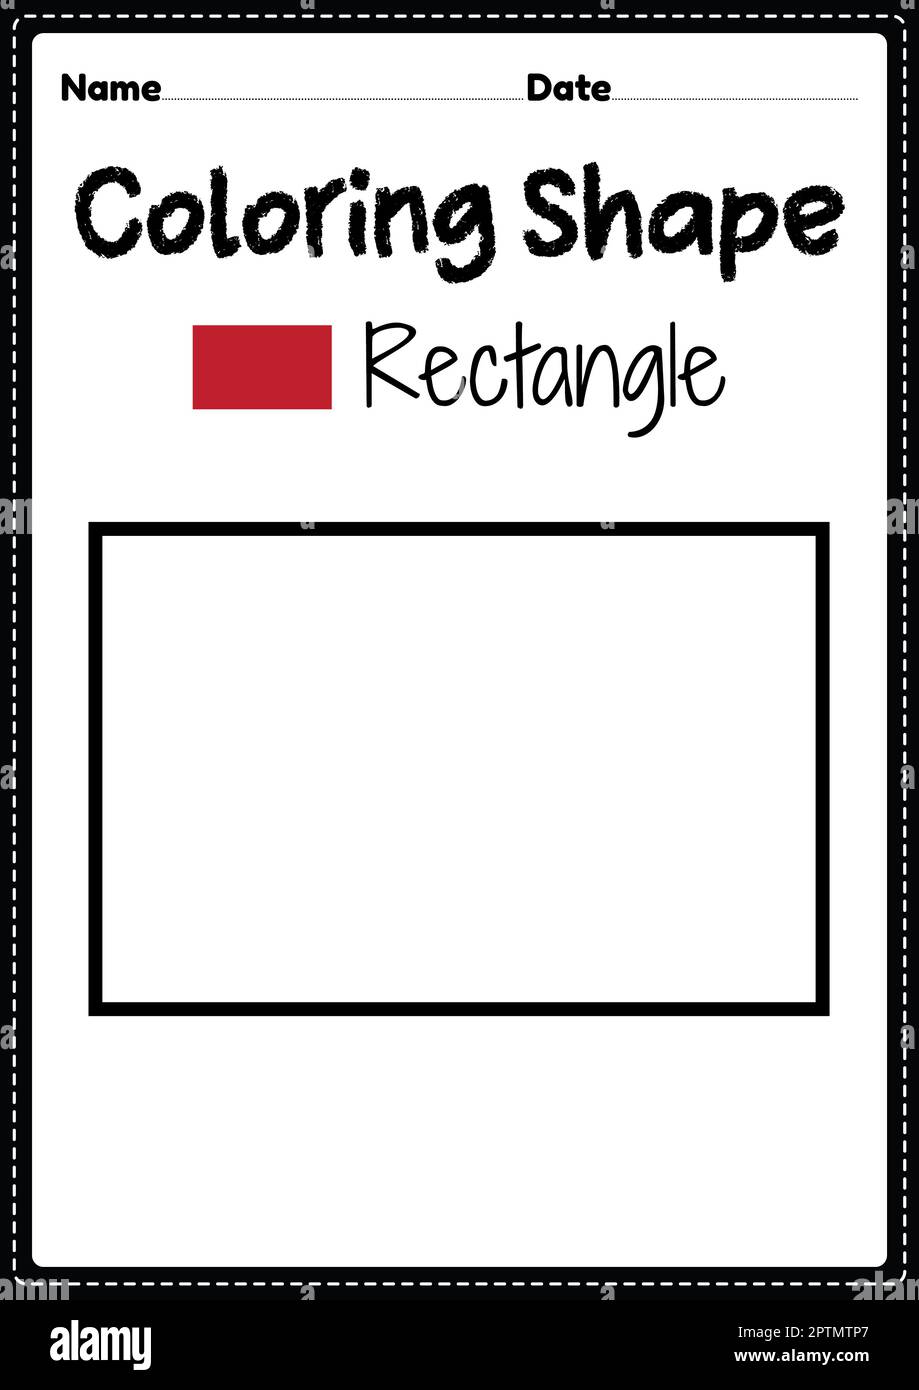 Rectangle coloring page for preschool kindergarten montessori kids to practice visual art drawing and coloring activities to develop creativity fo stock photo